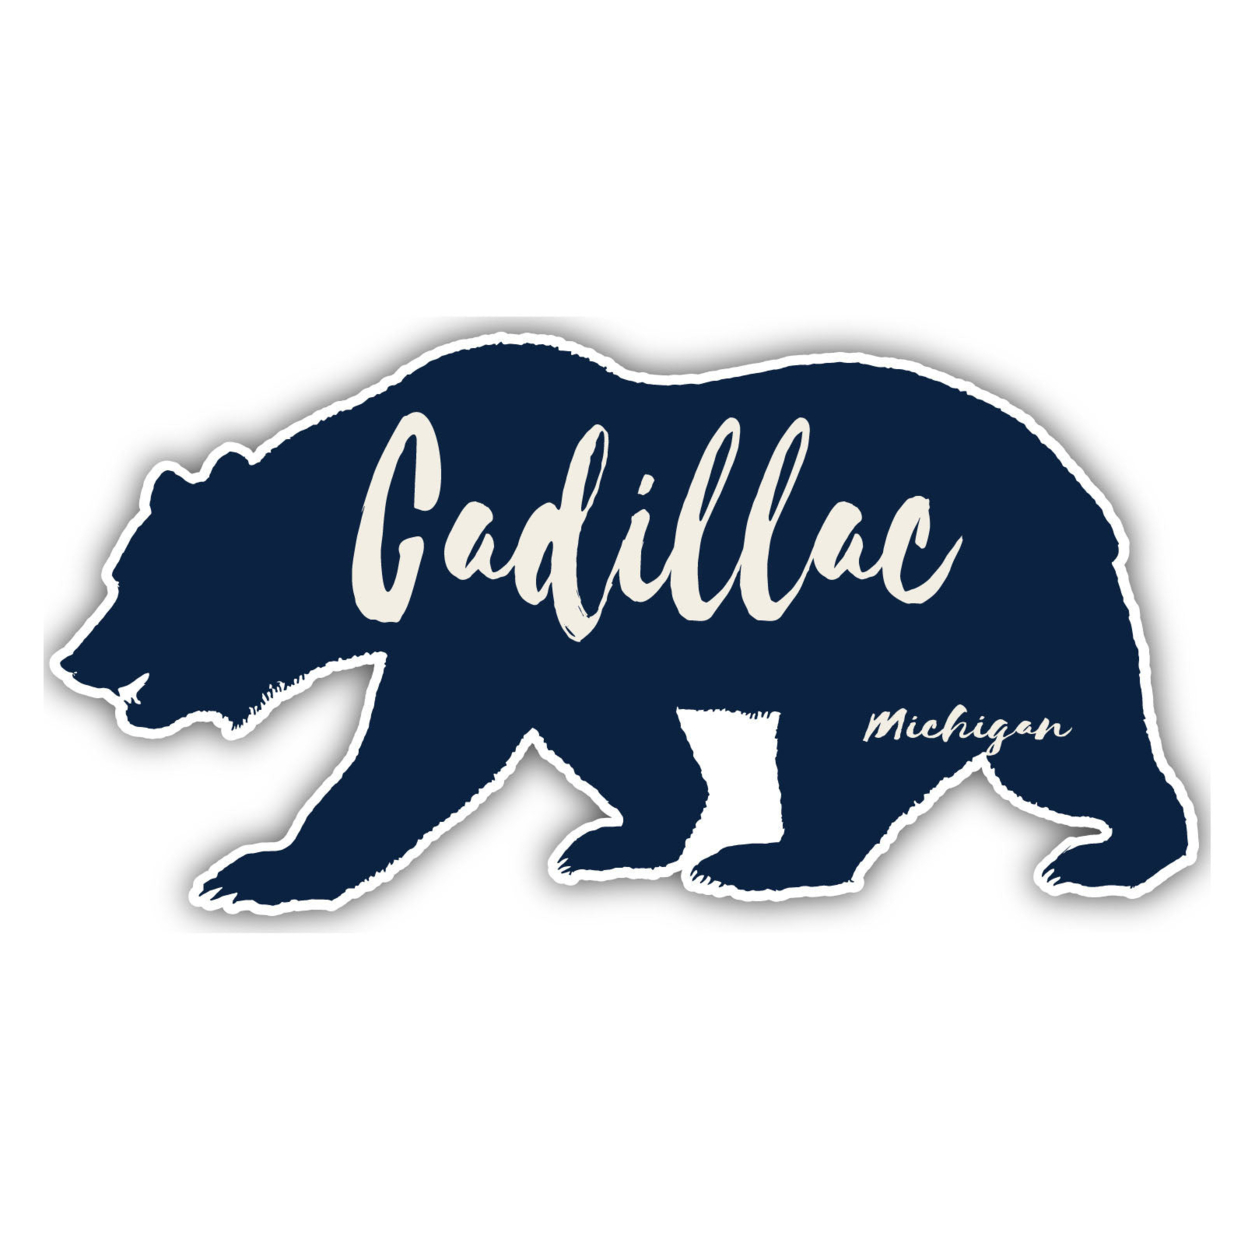 Cadillac Michigan Souvenir Decorative Stickers (Choose Theme And Size) - 4-Pack, 8-Inch, Bear